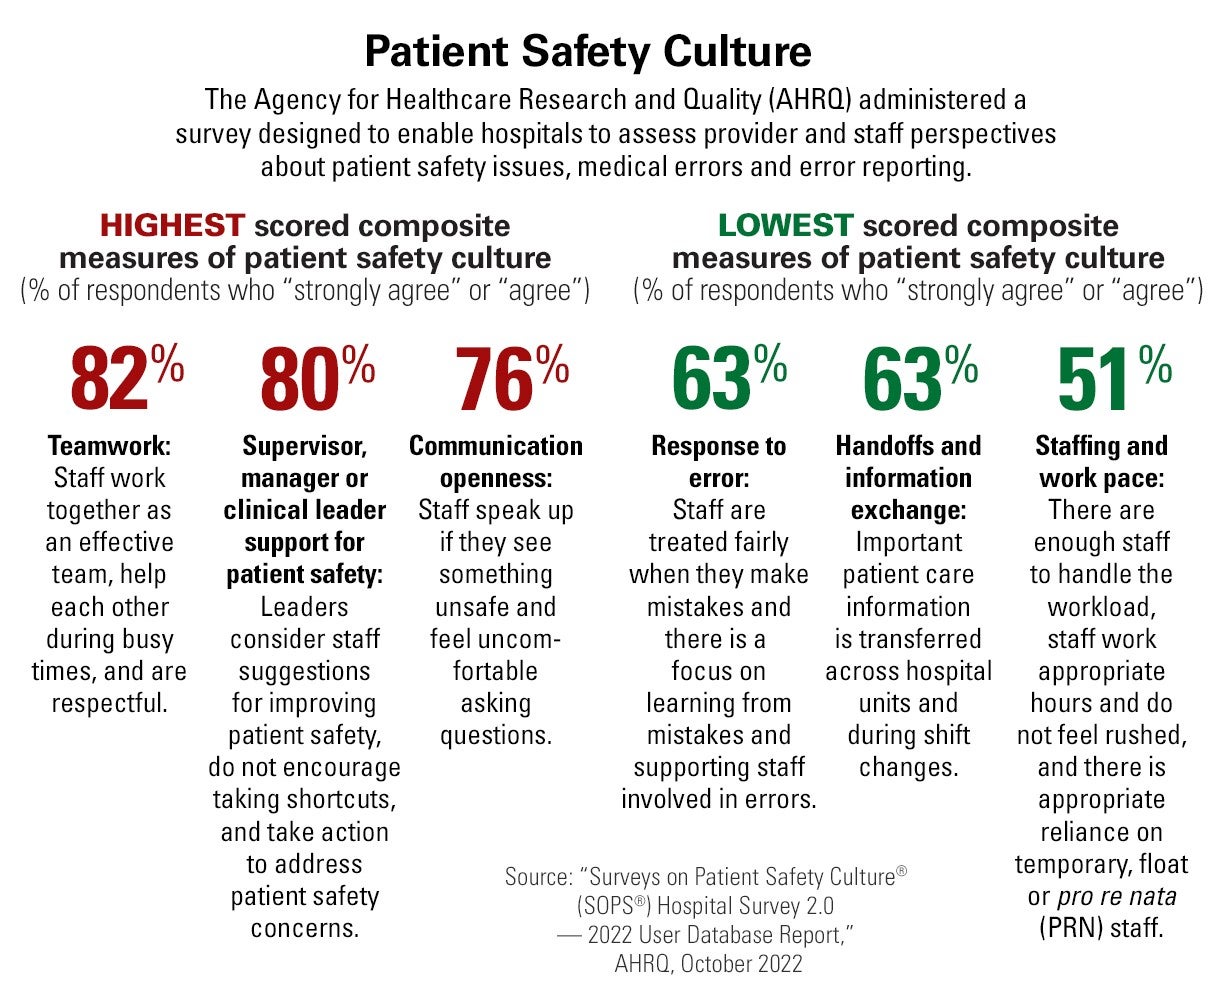 Patient Safety Culture. The Agency for Healthcare Research and Quality (AHRQ) administered a survey designed to enable hospitals to assess provider and staff perspectives about patient safety issues, medical errors and error reporting. Highest scared composite measures of patient safety culture: 82% Teamwork; 80% Supervisor, manager, or clinical leader support for patient safety; 76% Communications openness. Lowest scored composite measures for patient safety culture: 63% Response to error; 63% Handoffs and information exchange; 51% Staffing and work pace.